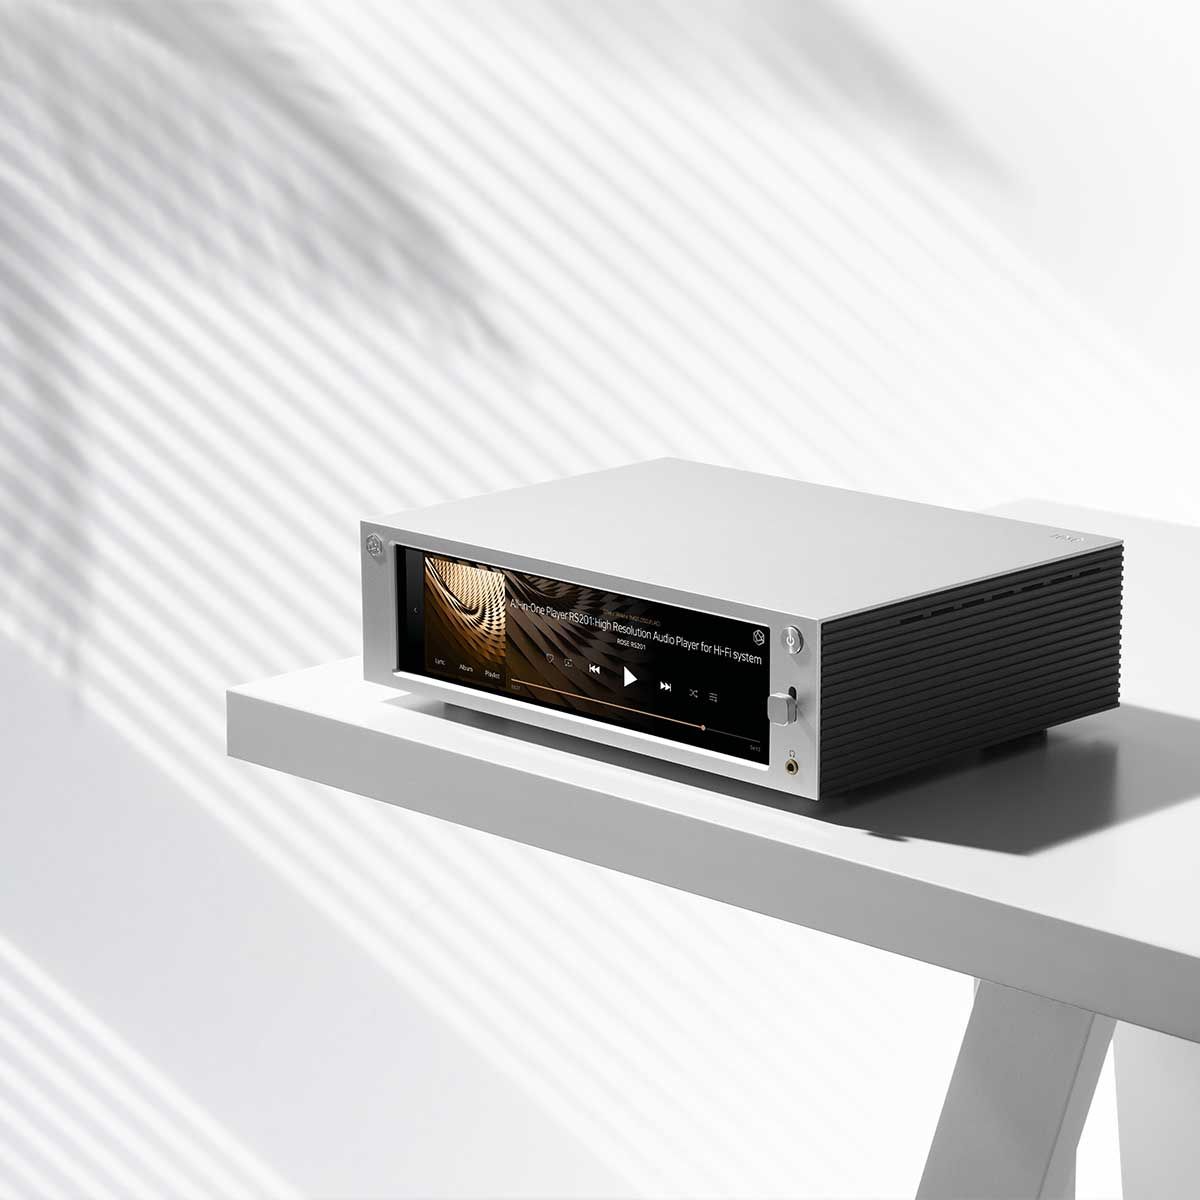 Side angled view of the HiFi Rose RS201E Integrated Amplifier and Network Streamer sitting on top of a tabletop.